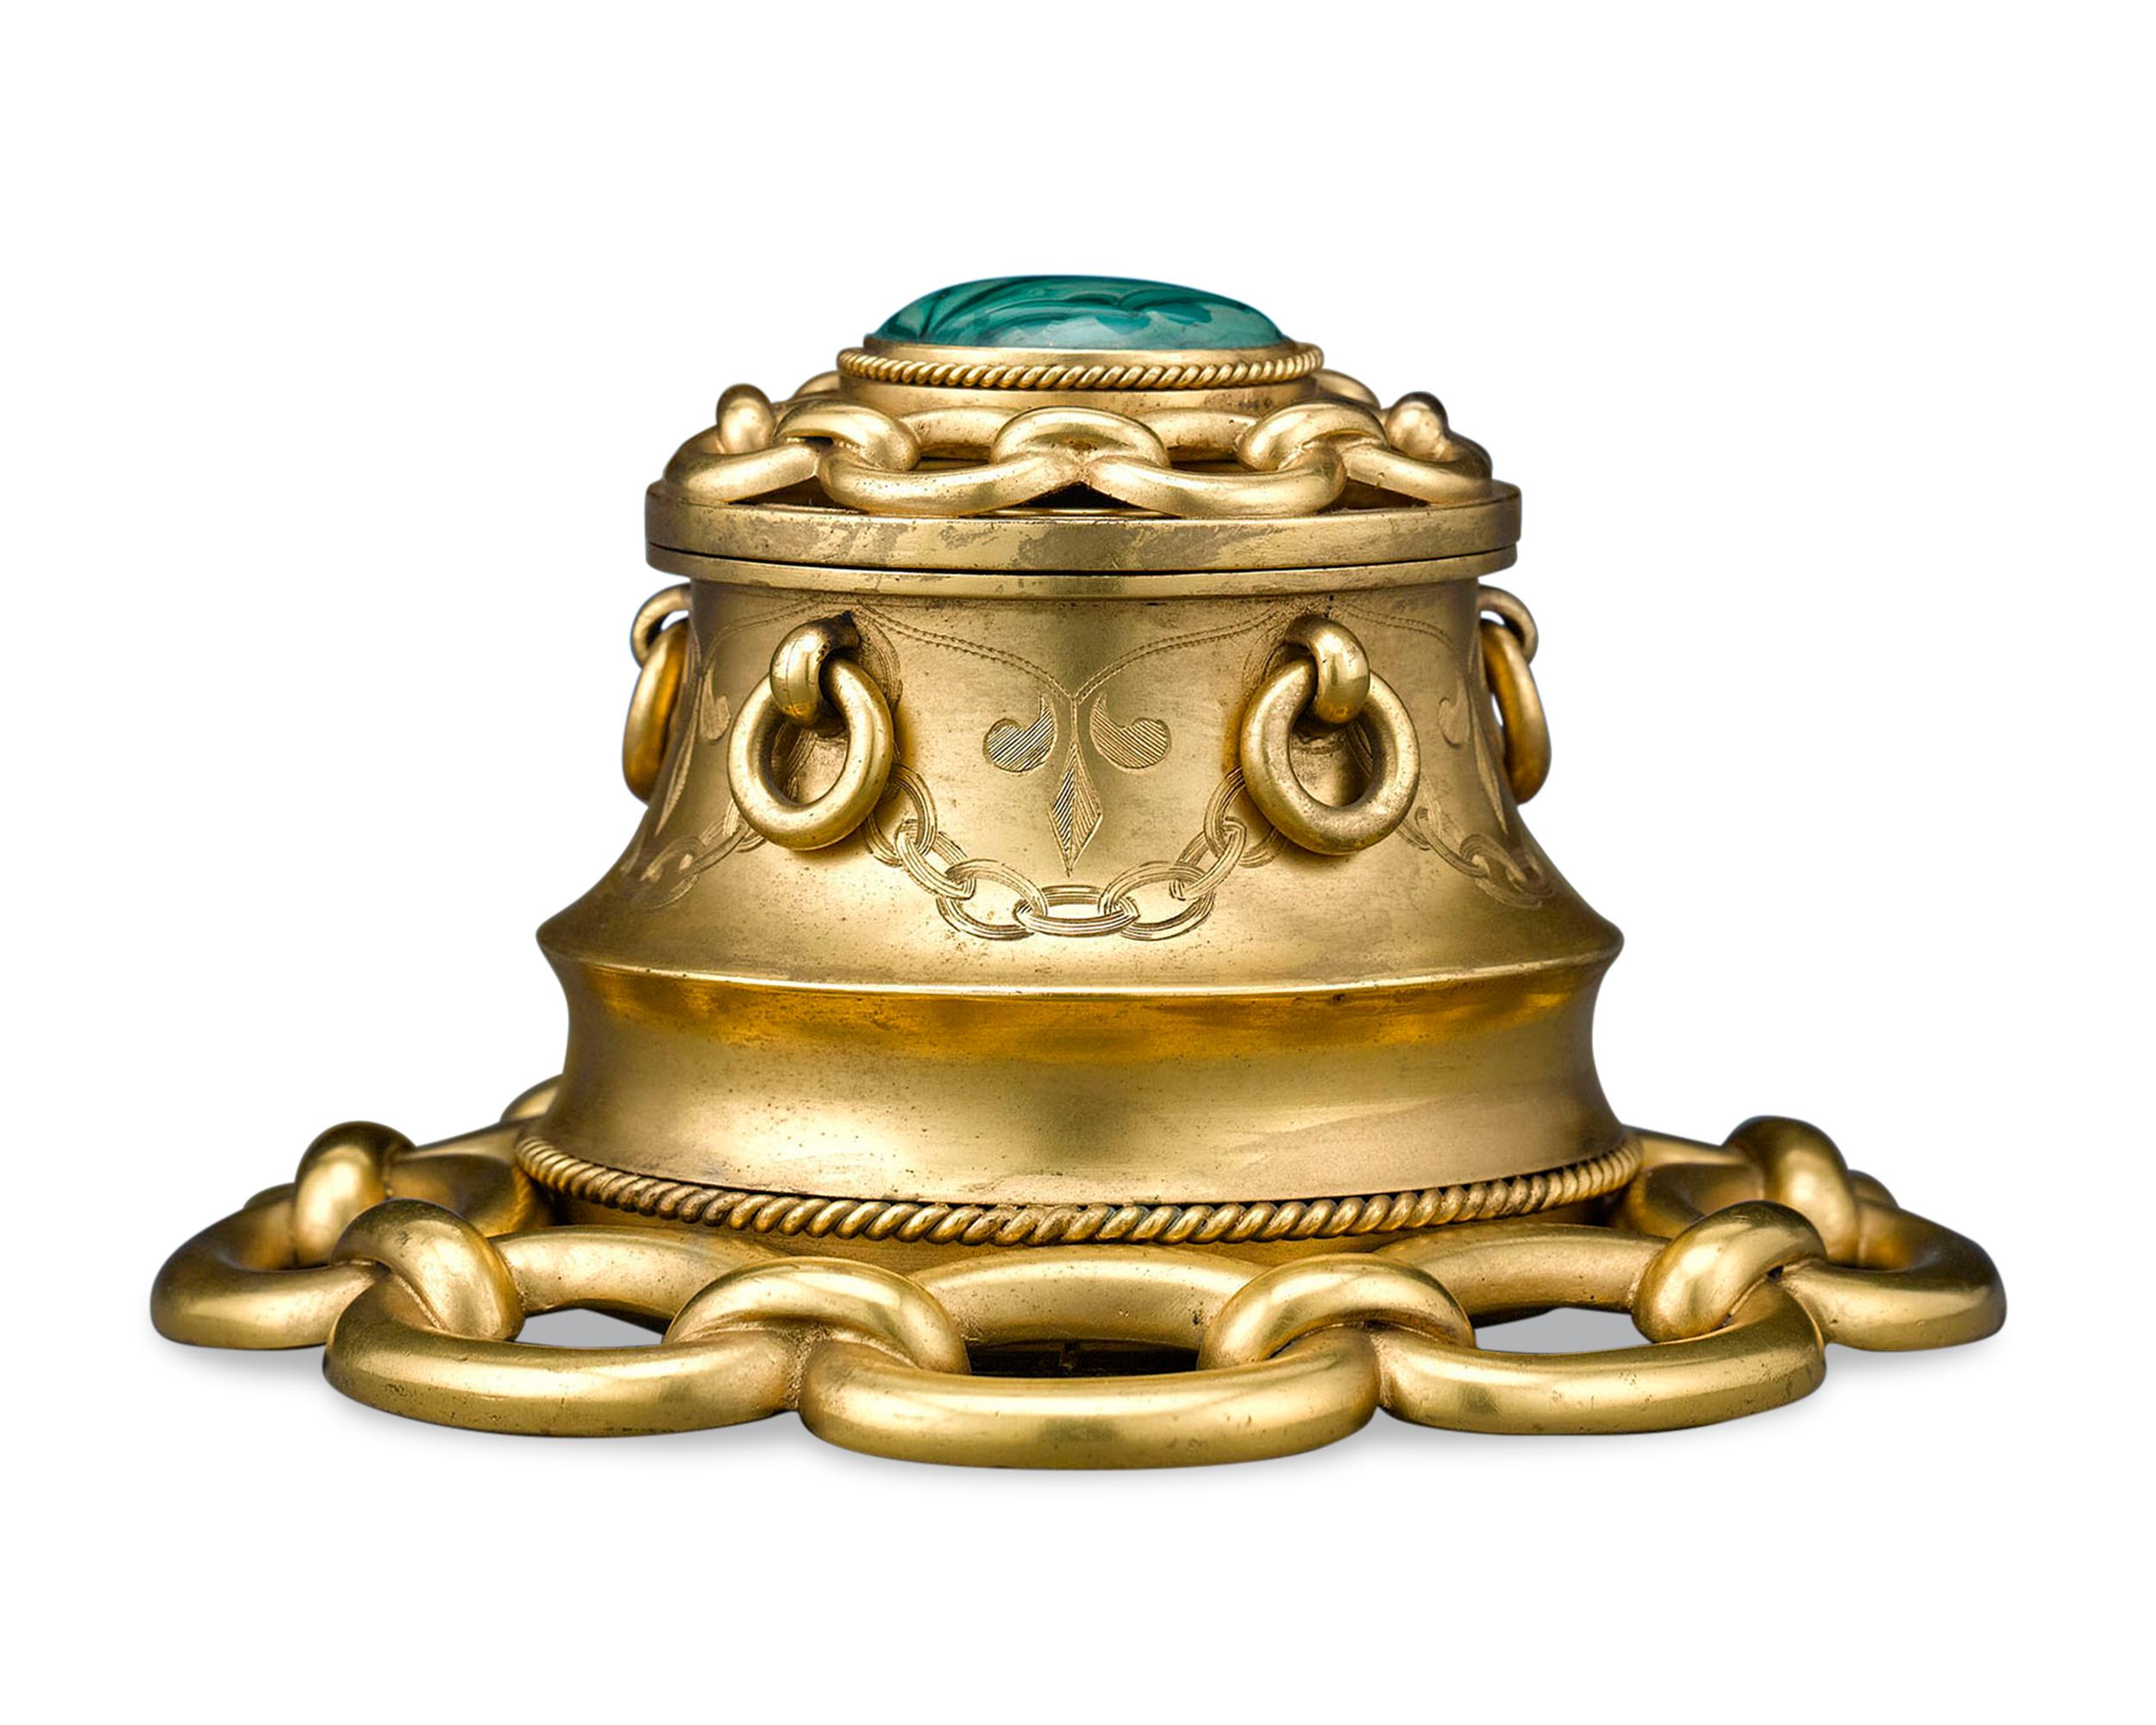 A large malachite cabochon is inset atop this turn-of-the-century inkwell. The vivid green mineral provides a wonderful contrast to the doré bronze body, which is crafted in a linked chain motif. This fine antique desk accessory retains its original